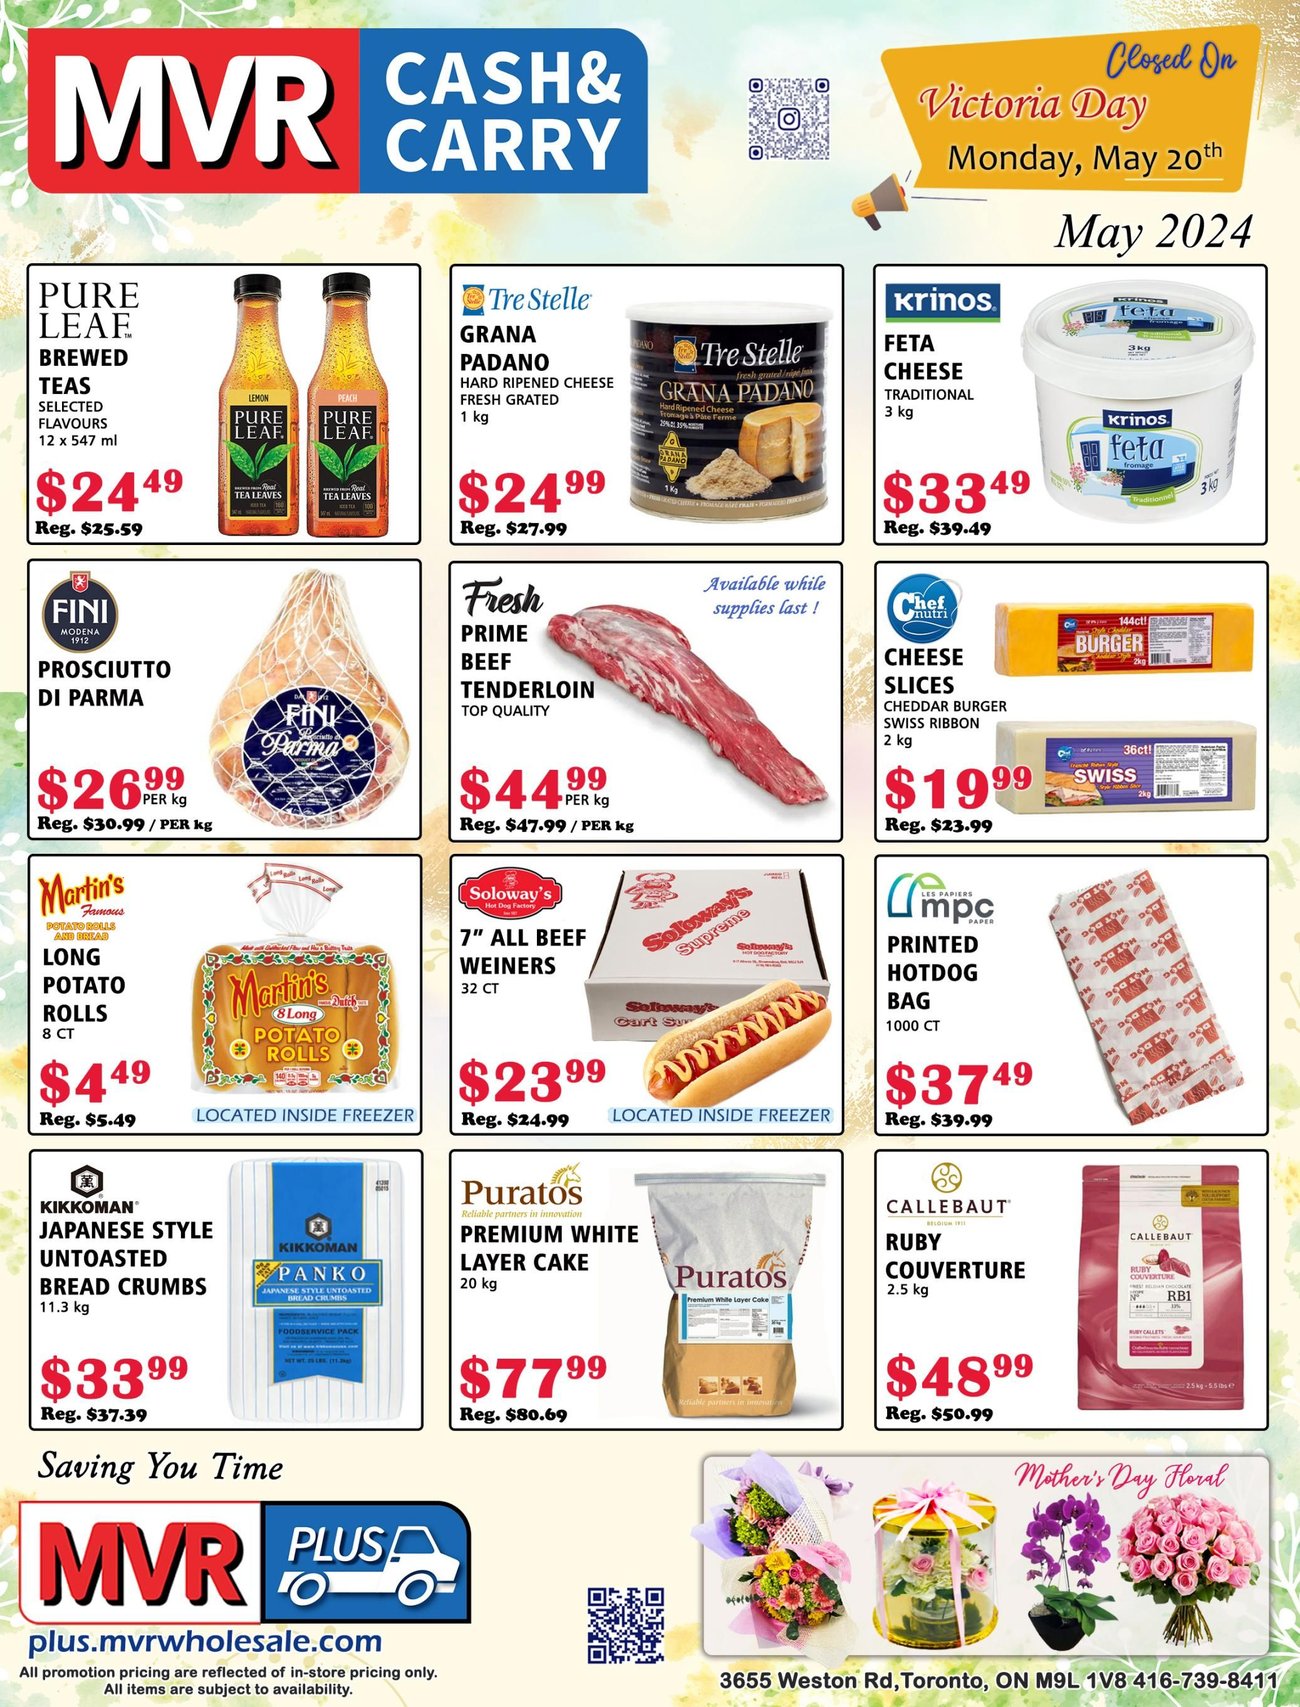 MVR Cash and Carry - Monthly Specials - Page 1